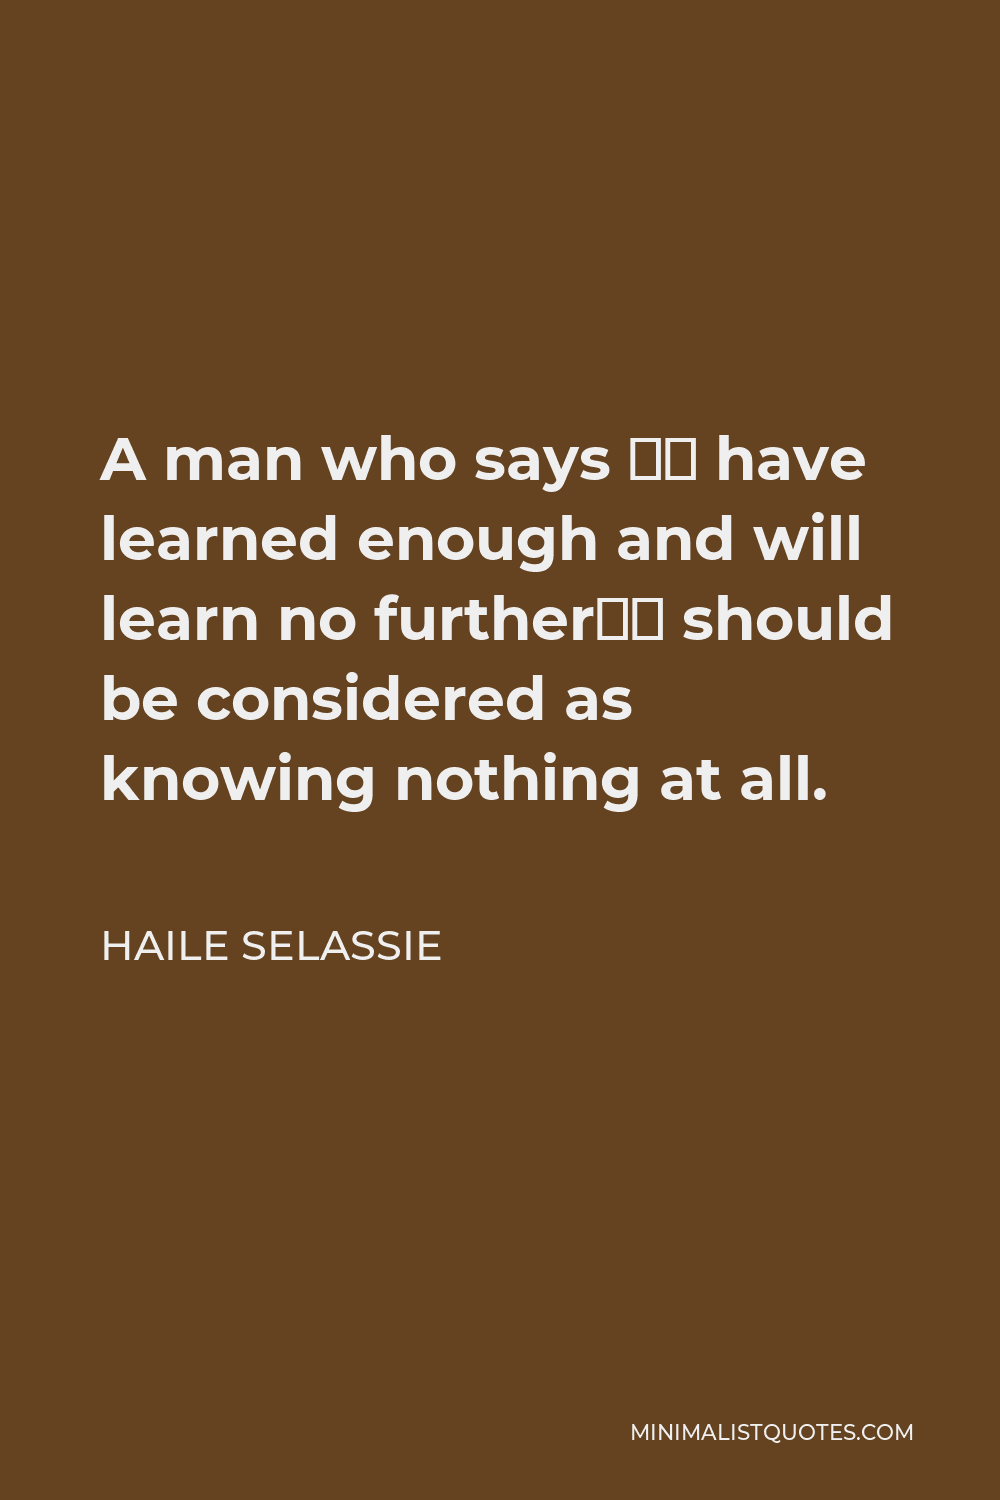 Haile Selassie Quote - A man who says “I have learned enough and will learn no further” should be considered as knowing nothing at all.